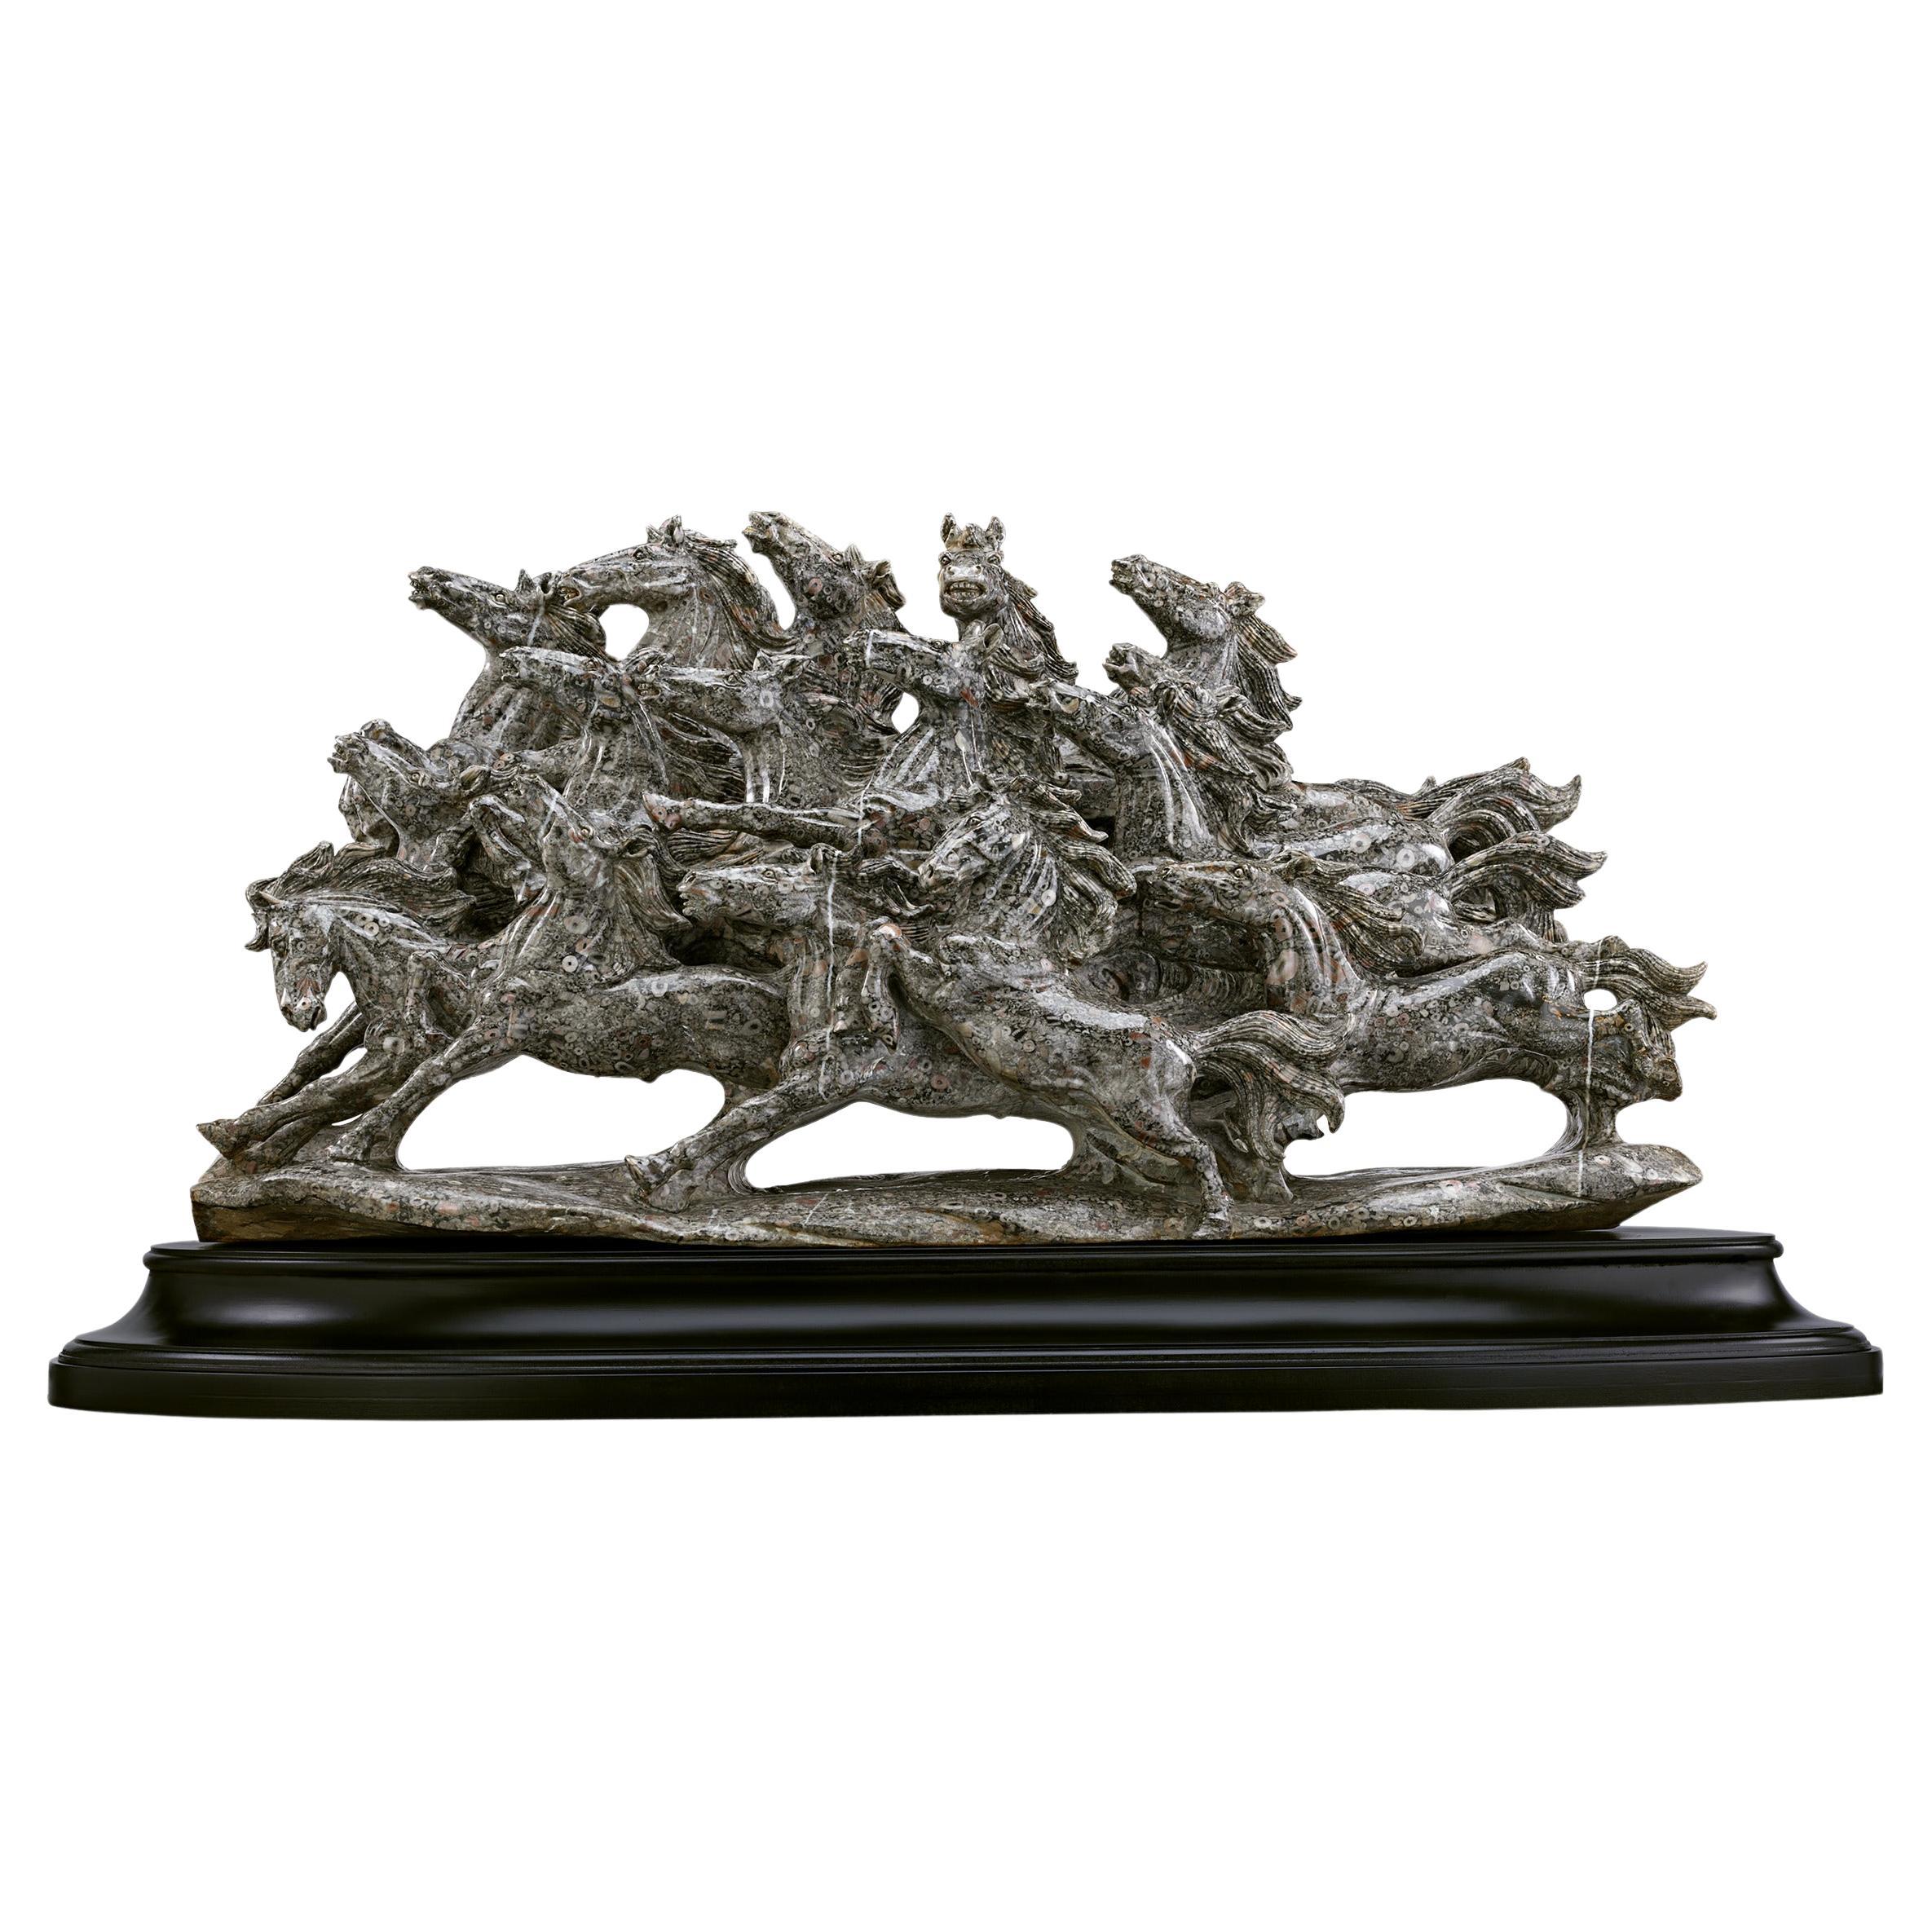 Fossiliferous Crinoid Marble Sculpture Of Wild Horses For Sale